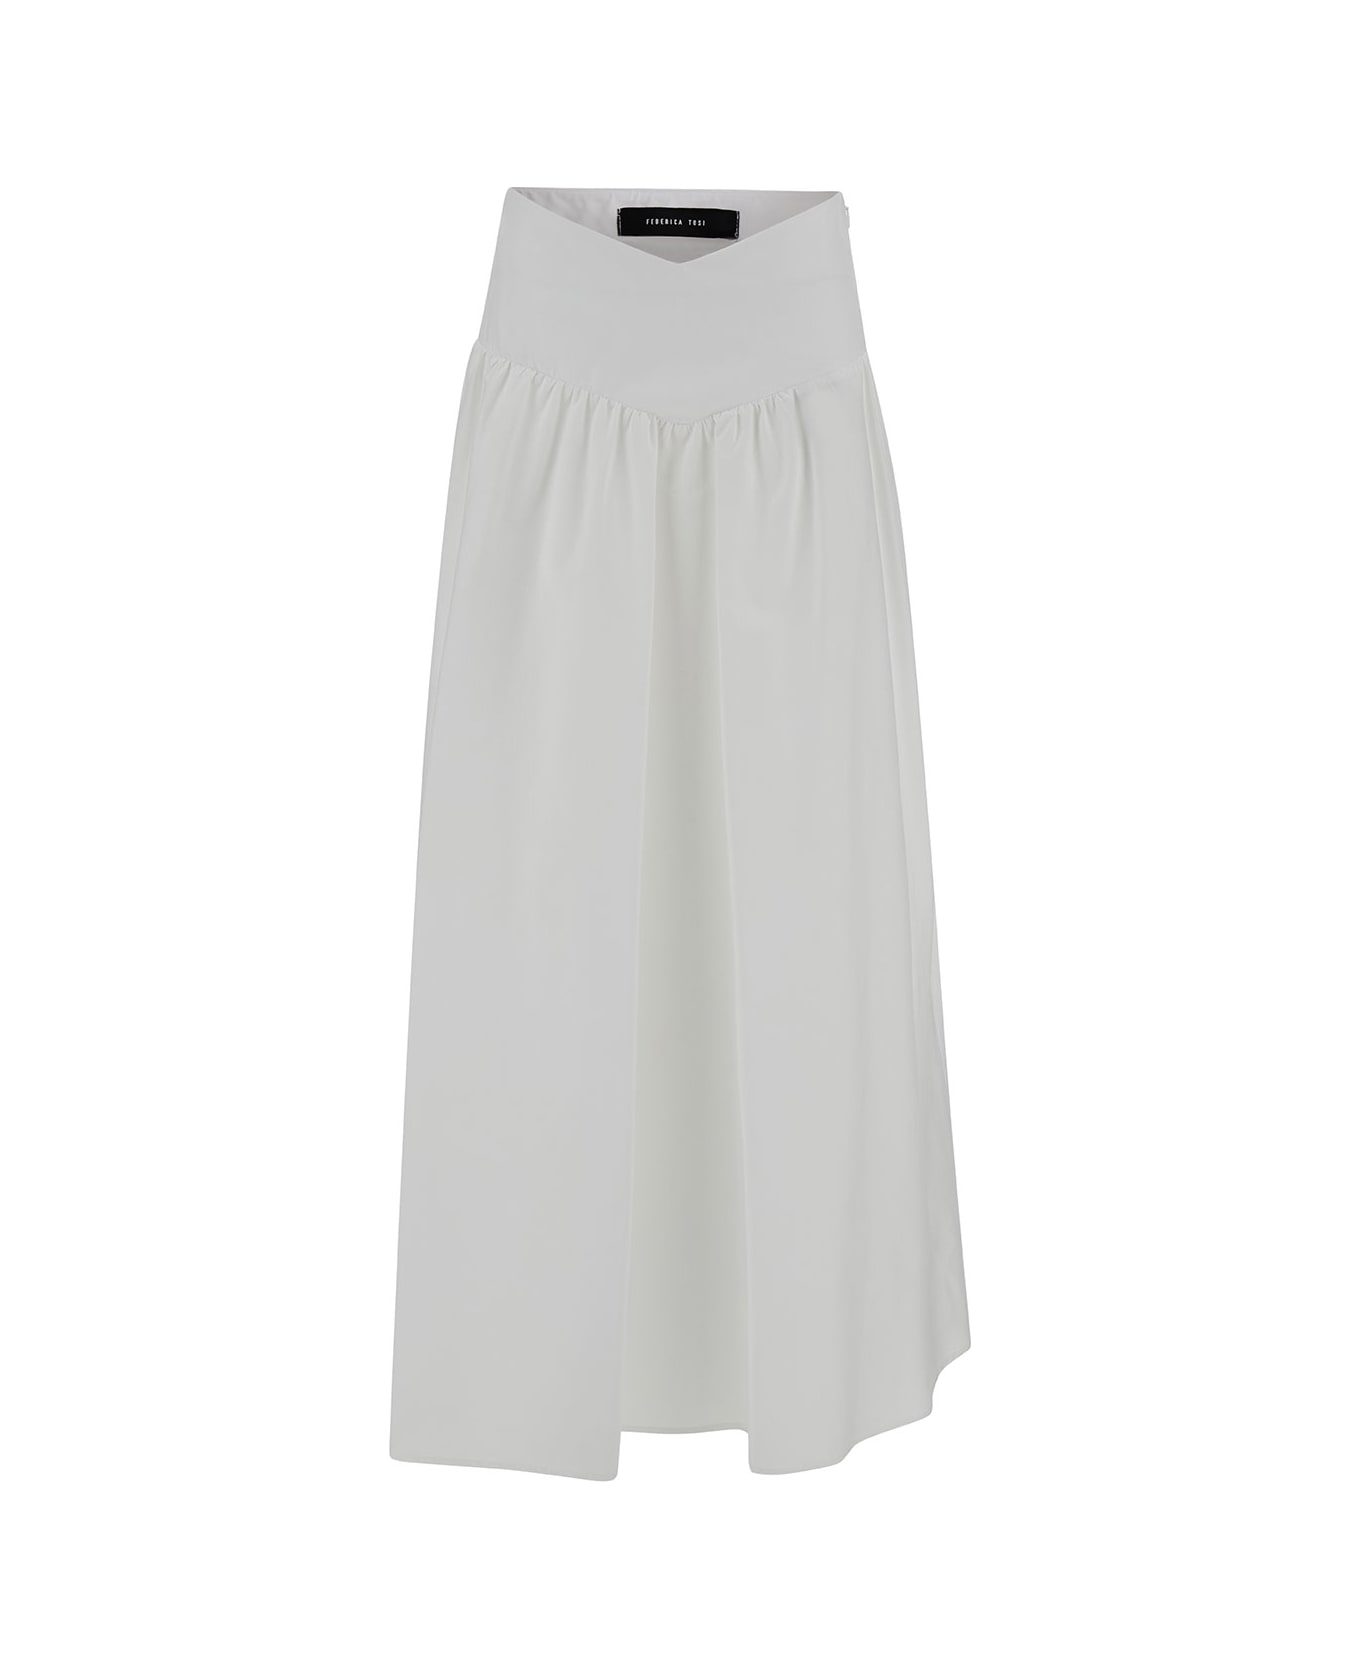 Federica Tosi Long White Pleated Skirt In Stretch Cotton Woman - White